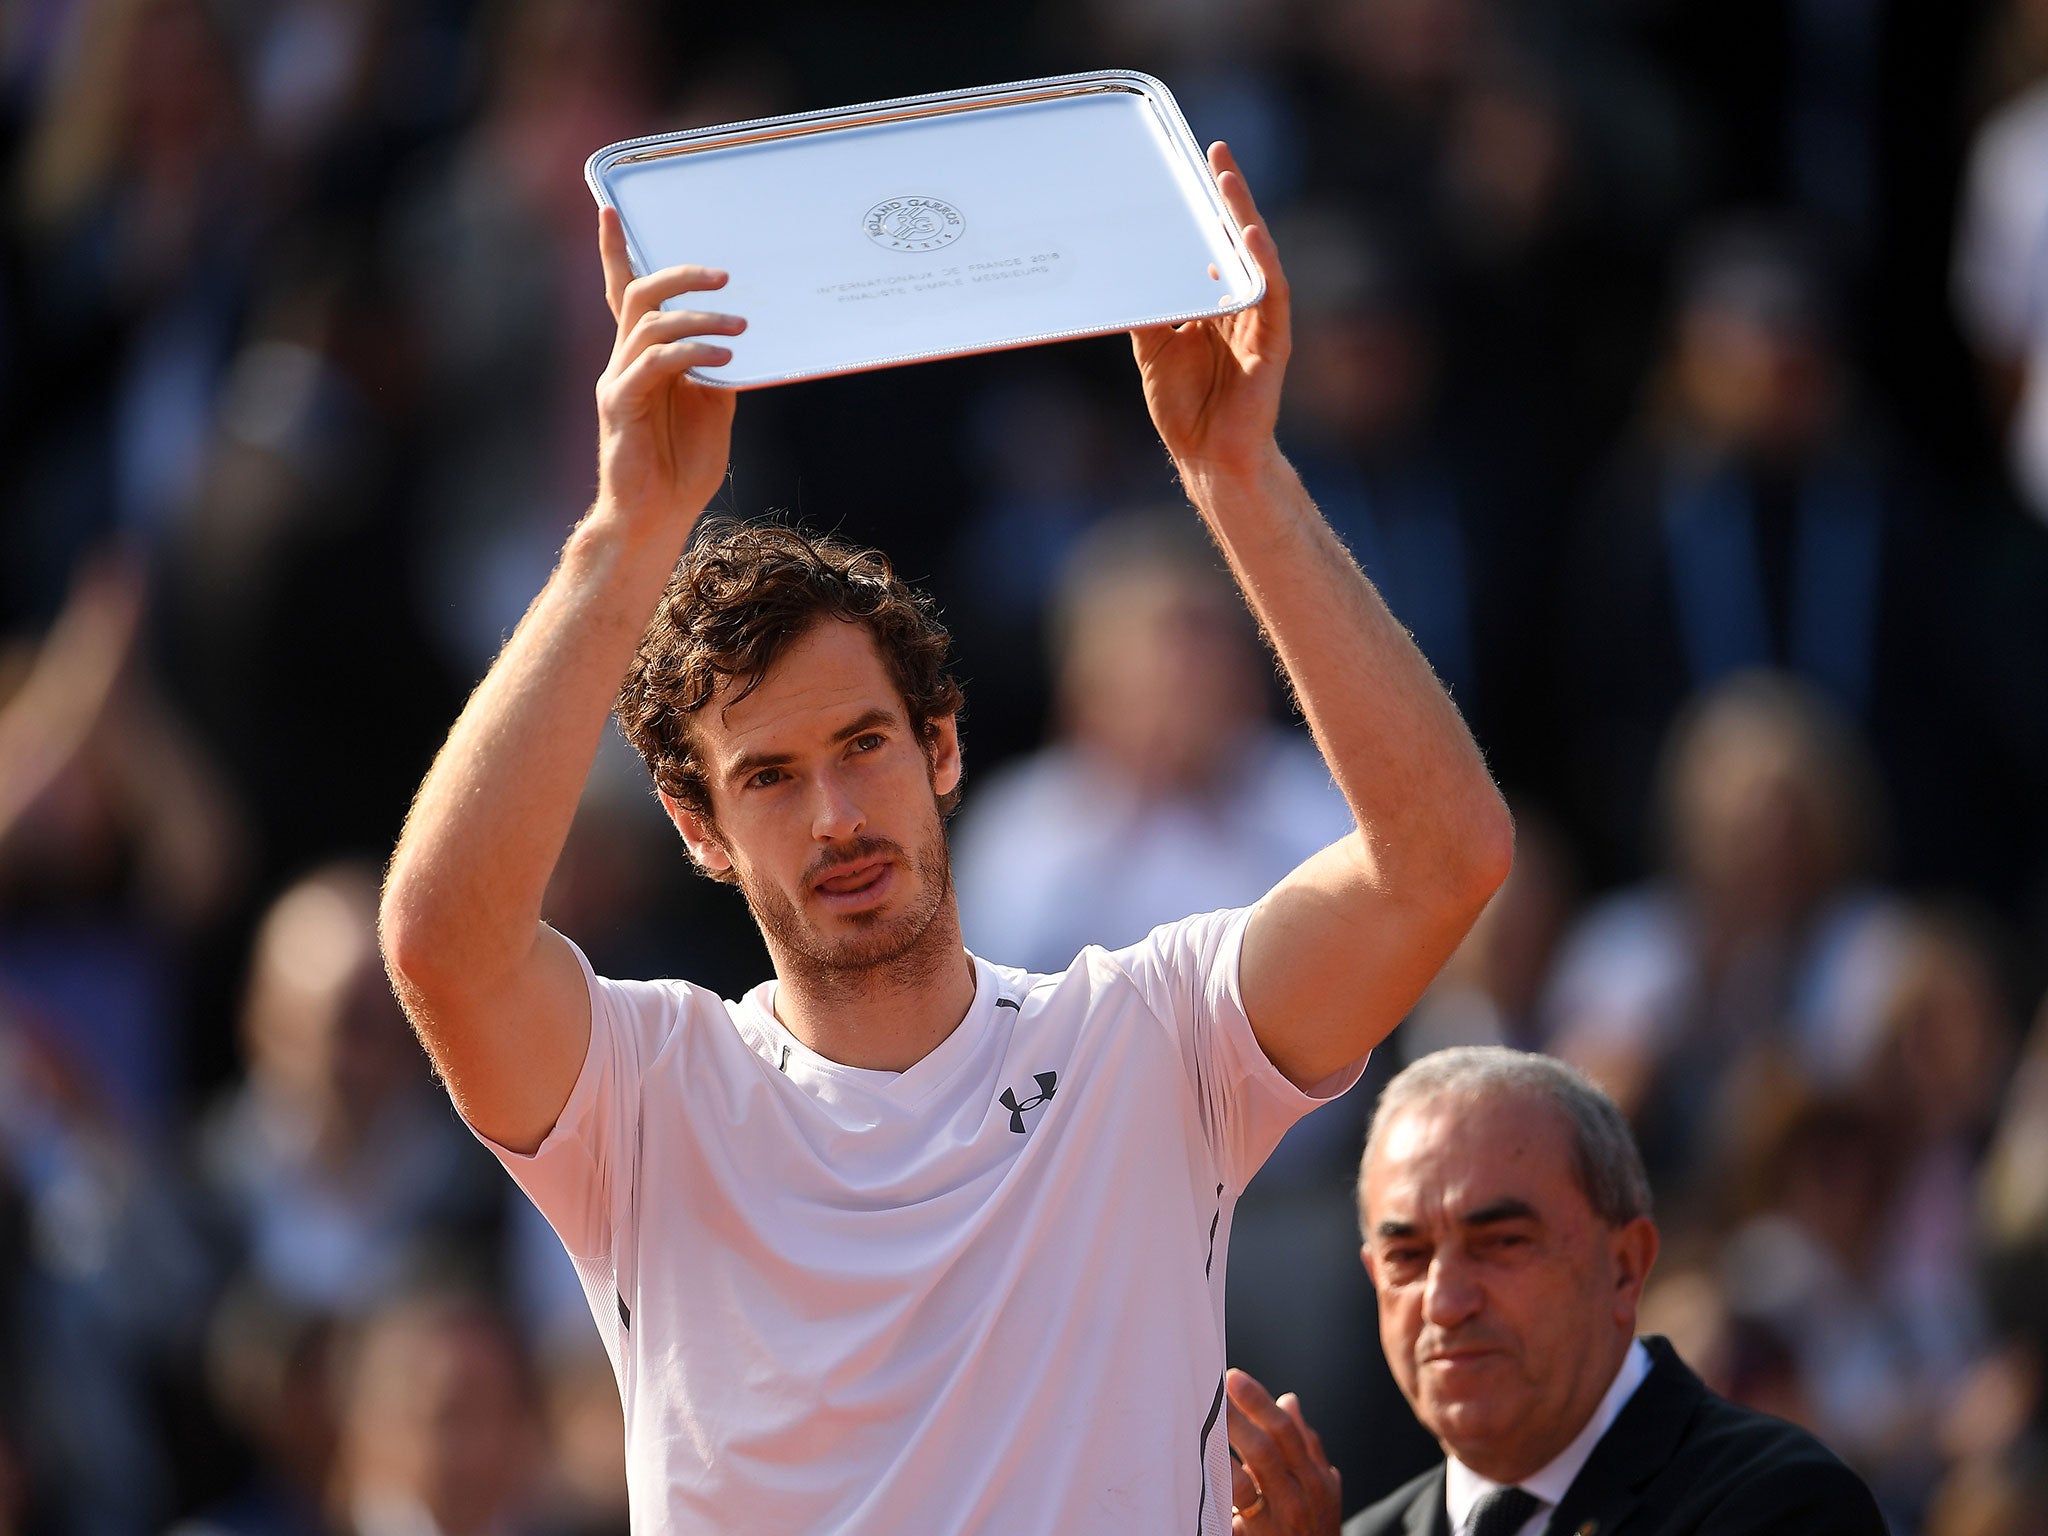 Andy Murray, former Wimbledon champion has announced three more investments in British startups